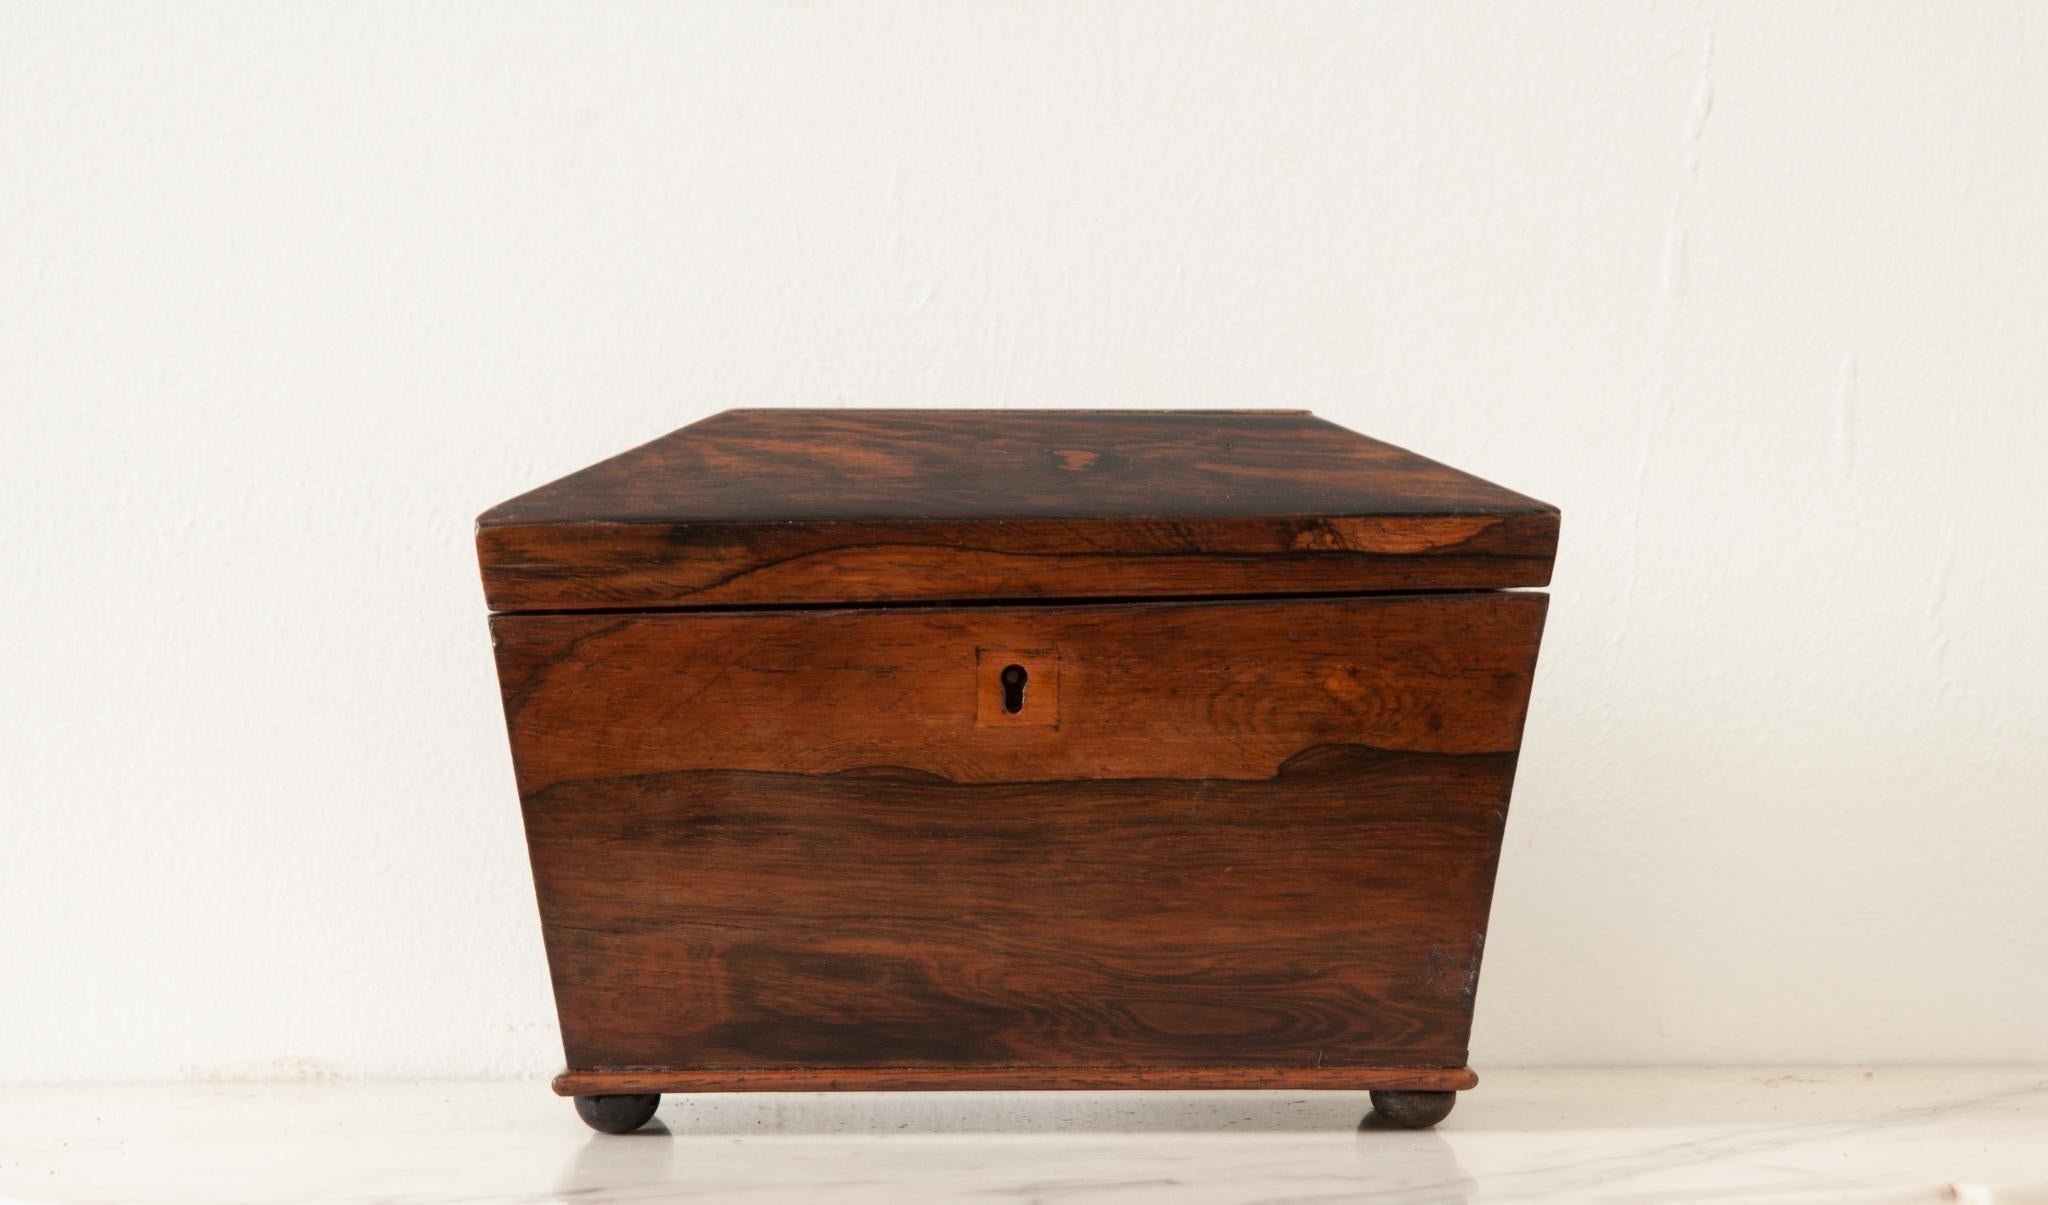 An English 19th Century rosewood small tea caddy. This box has an angular top opening to a fitted interior. There are two compartments with removable tops once used for storing loose leaf teas. Be sure to view the detailed images to view how